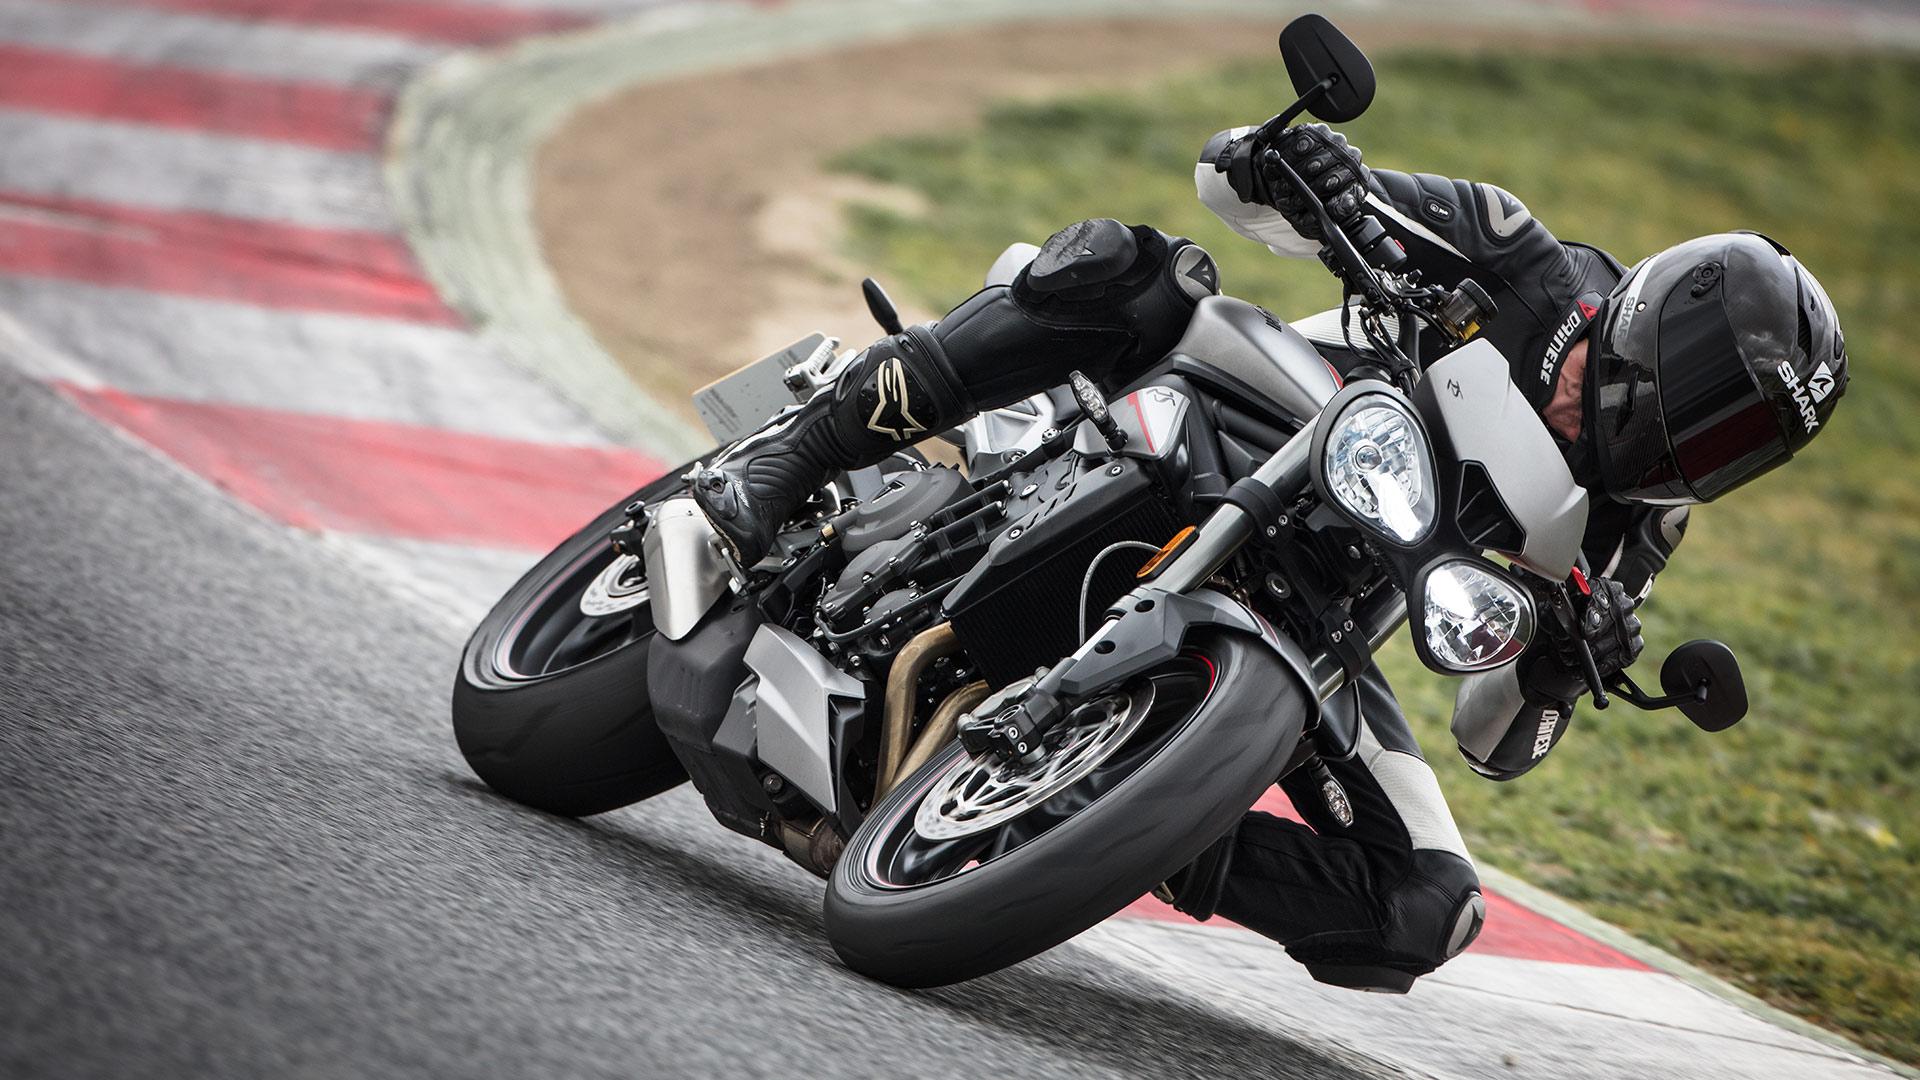 Street Triple Technology. For the Ride